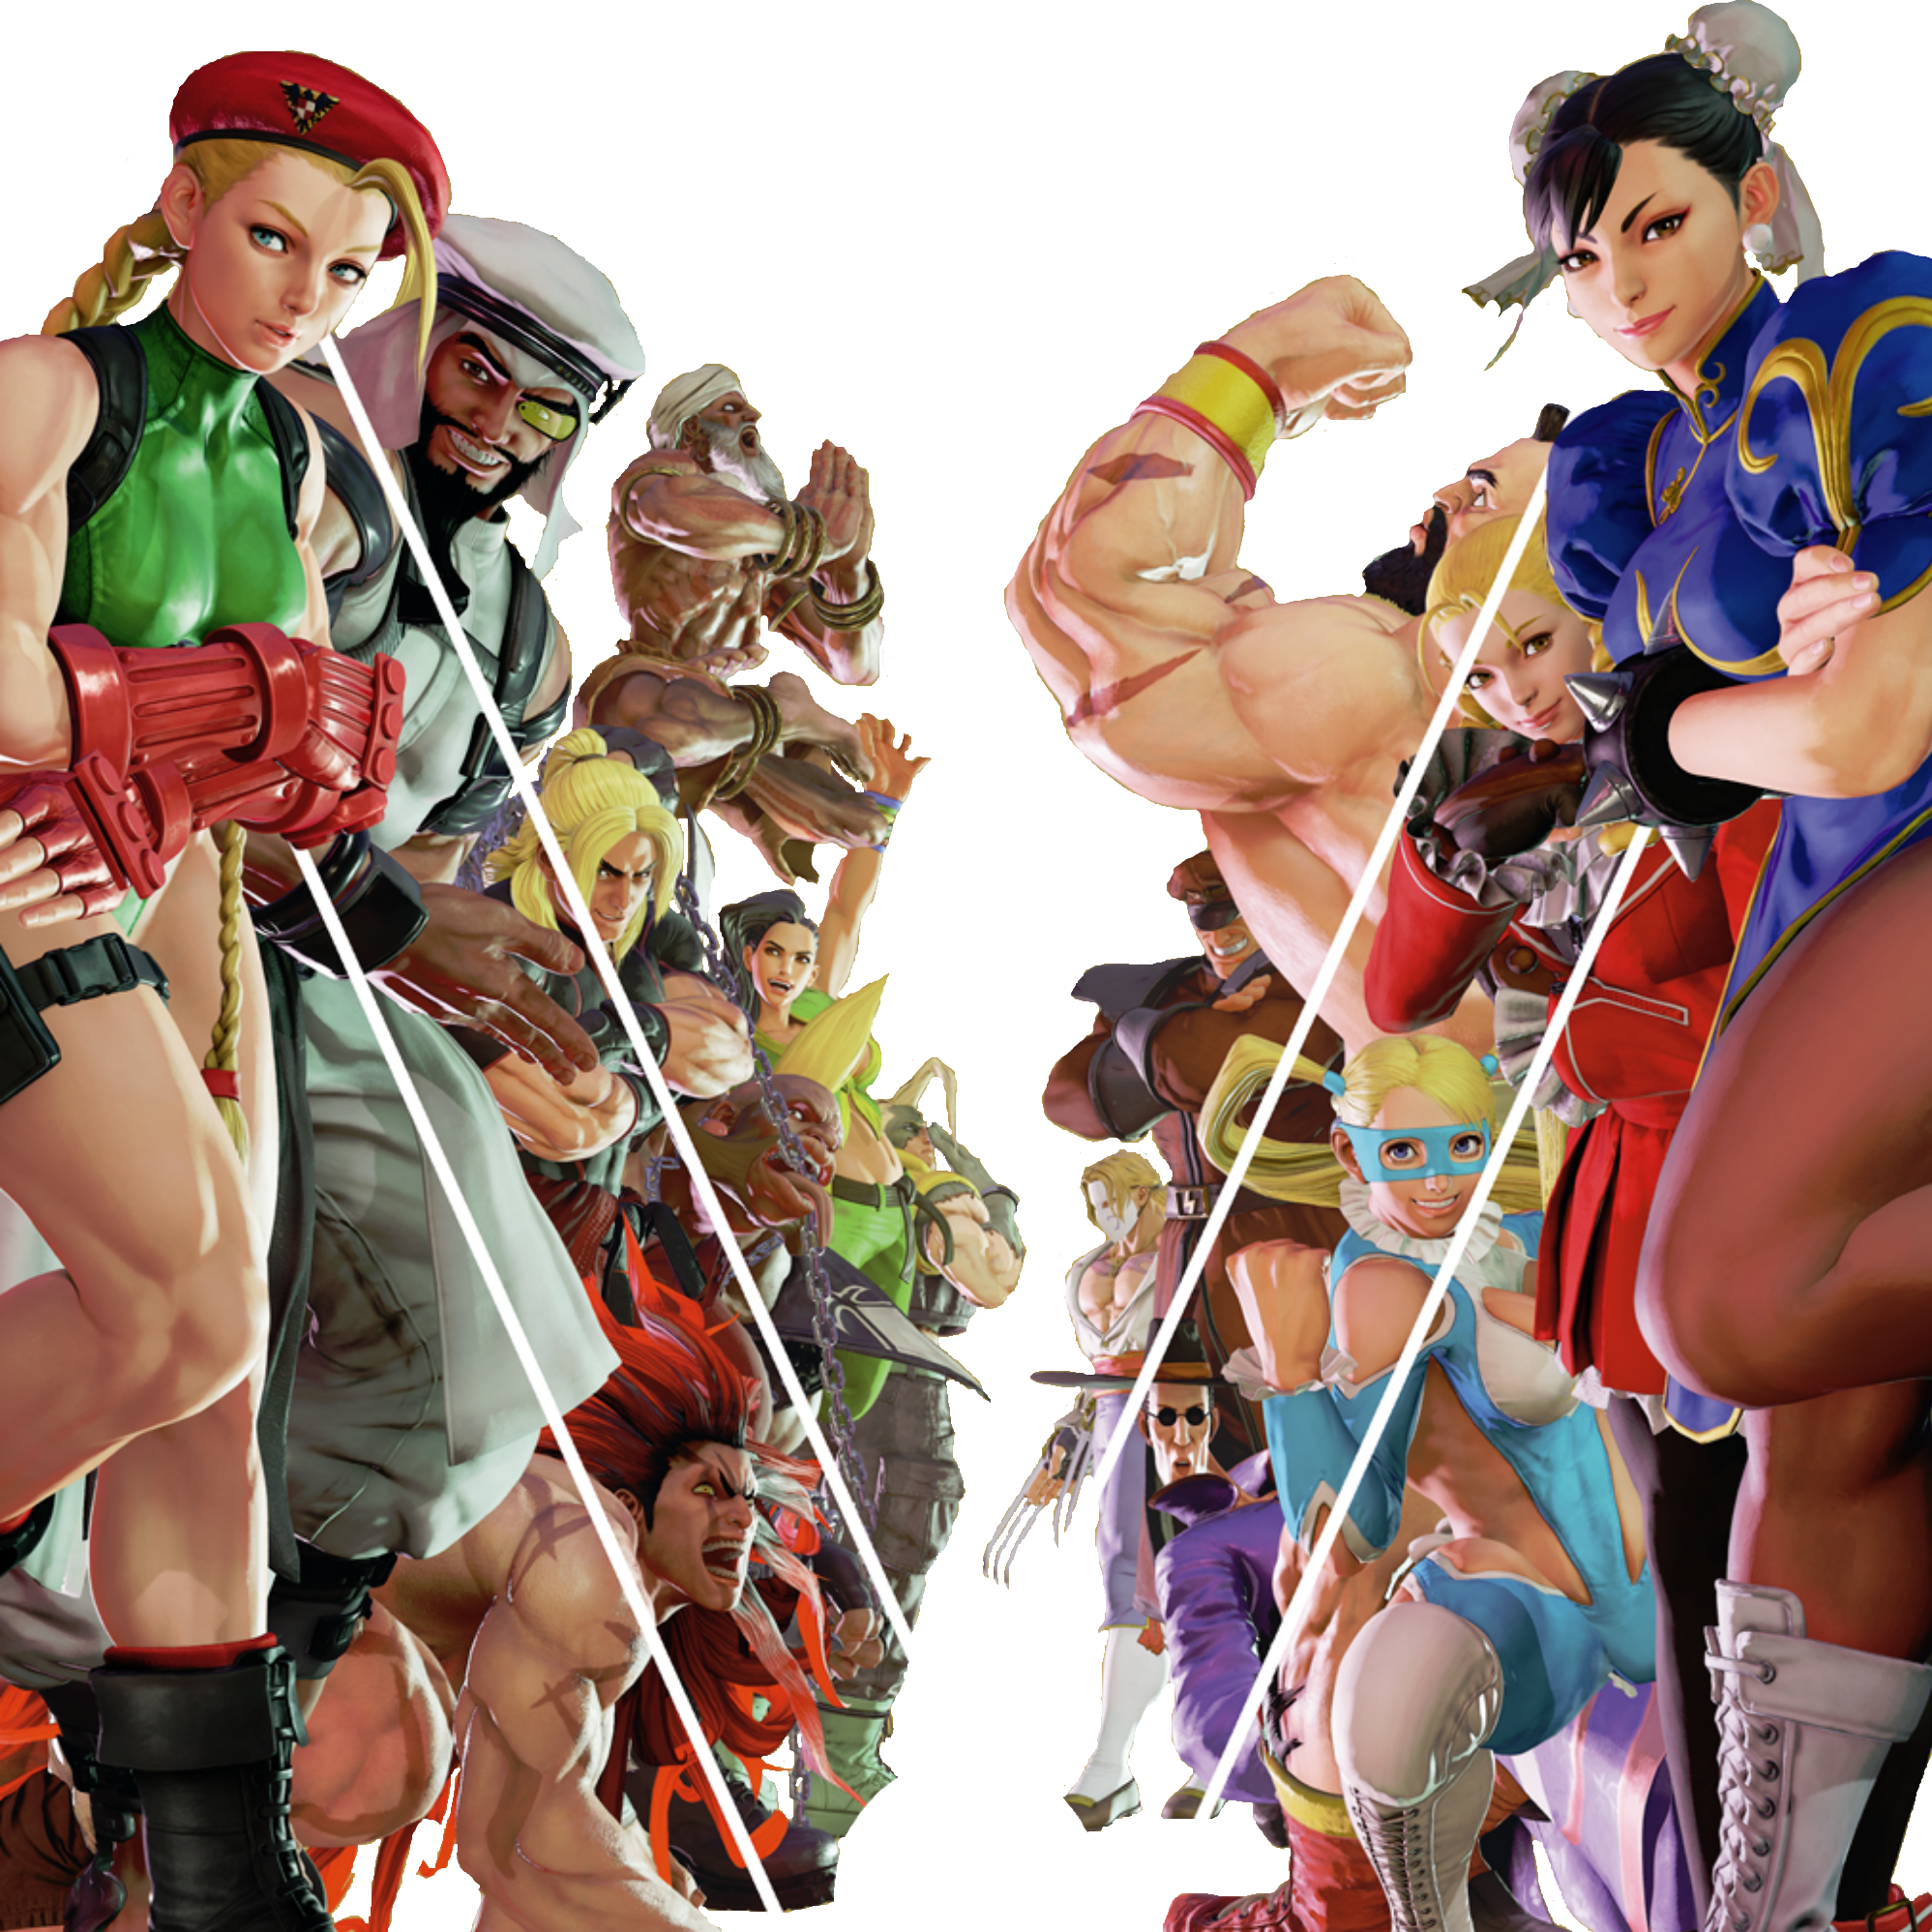 Street Fighter V Characters render by AwesomeOKingGuy on DeviantArt